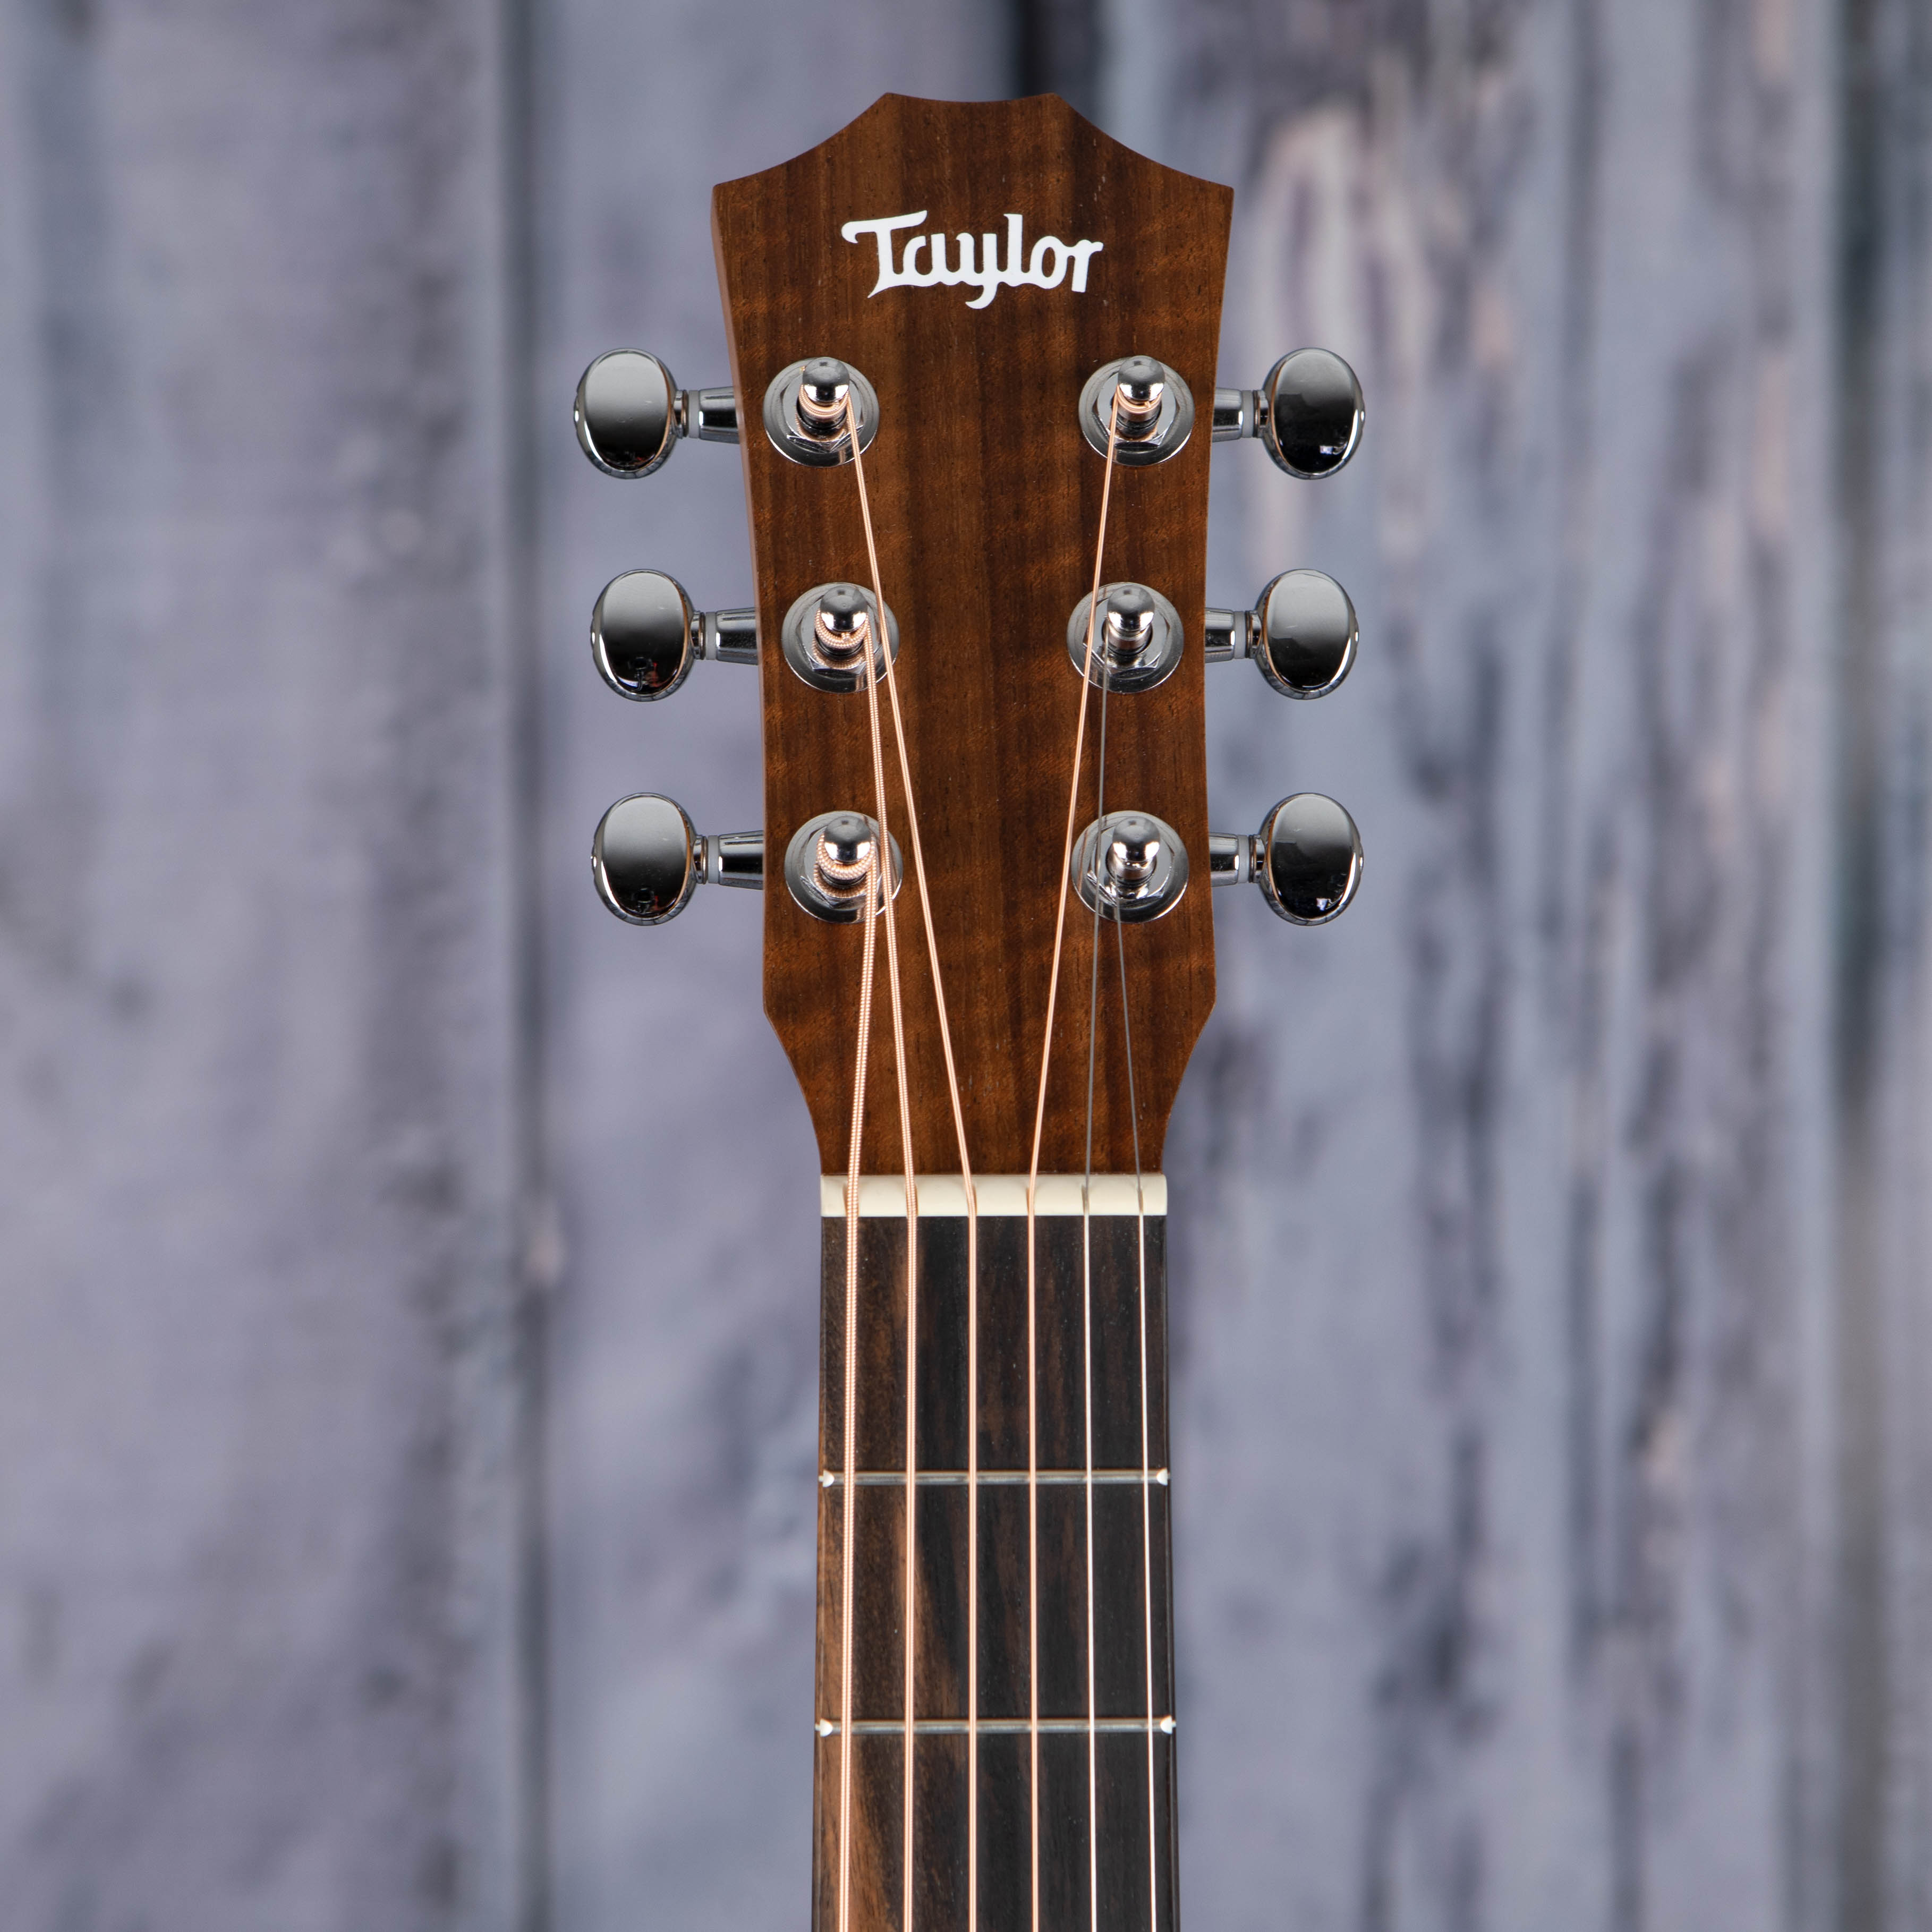 Taylor BT1e Baby Taylor Acoustic/Electric Guitar, Natural, front headstock